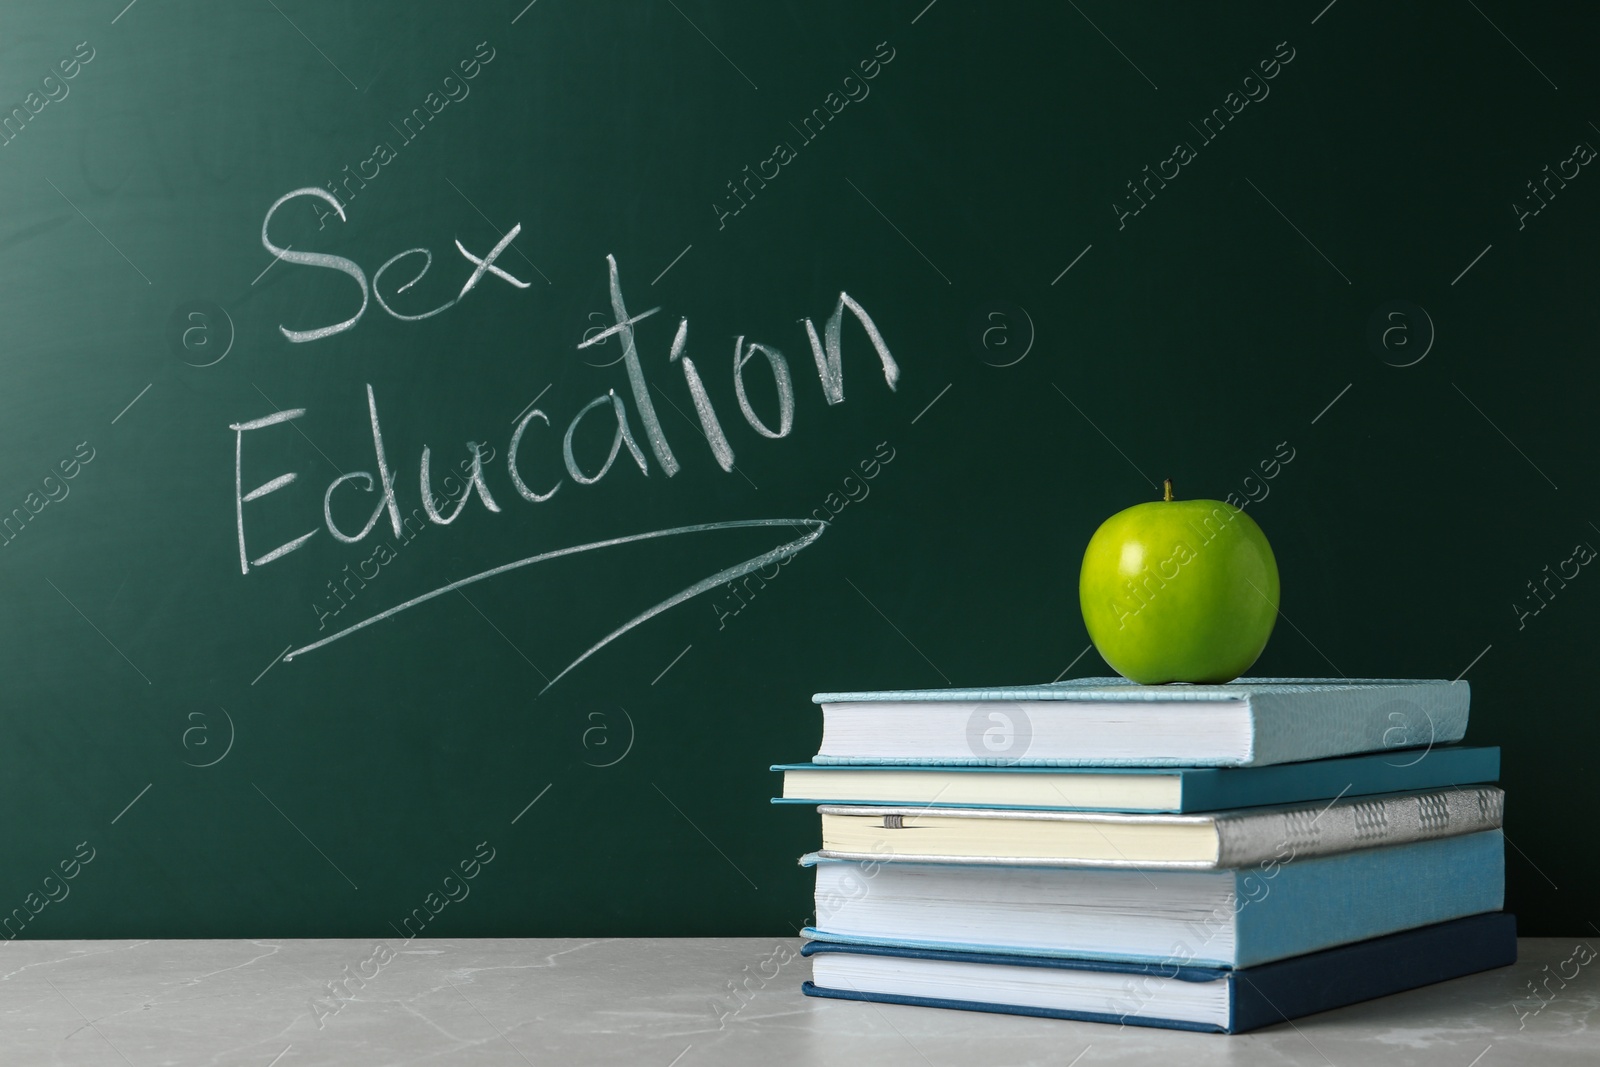 Photo of Books and apple on grey table near chalkboard with phrase "Sex education"